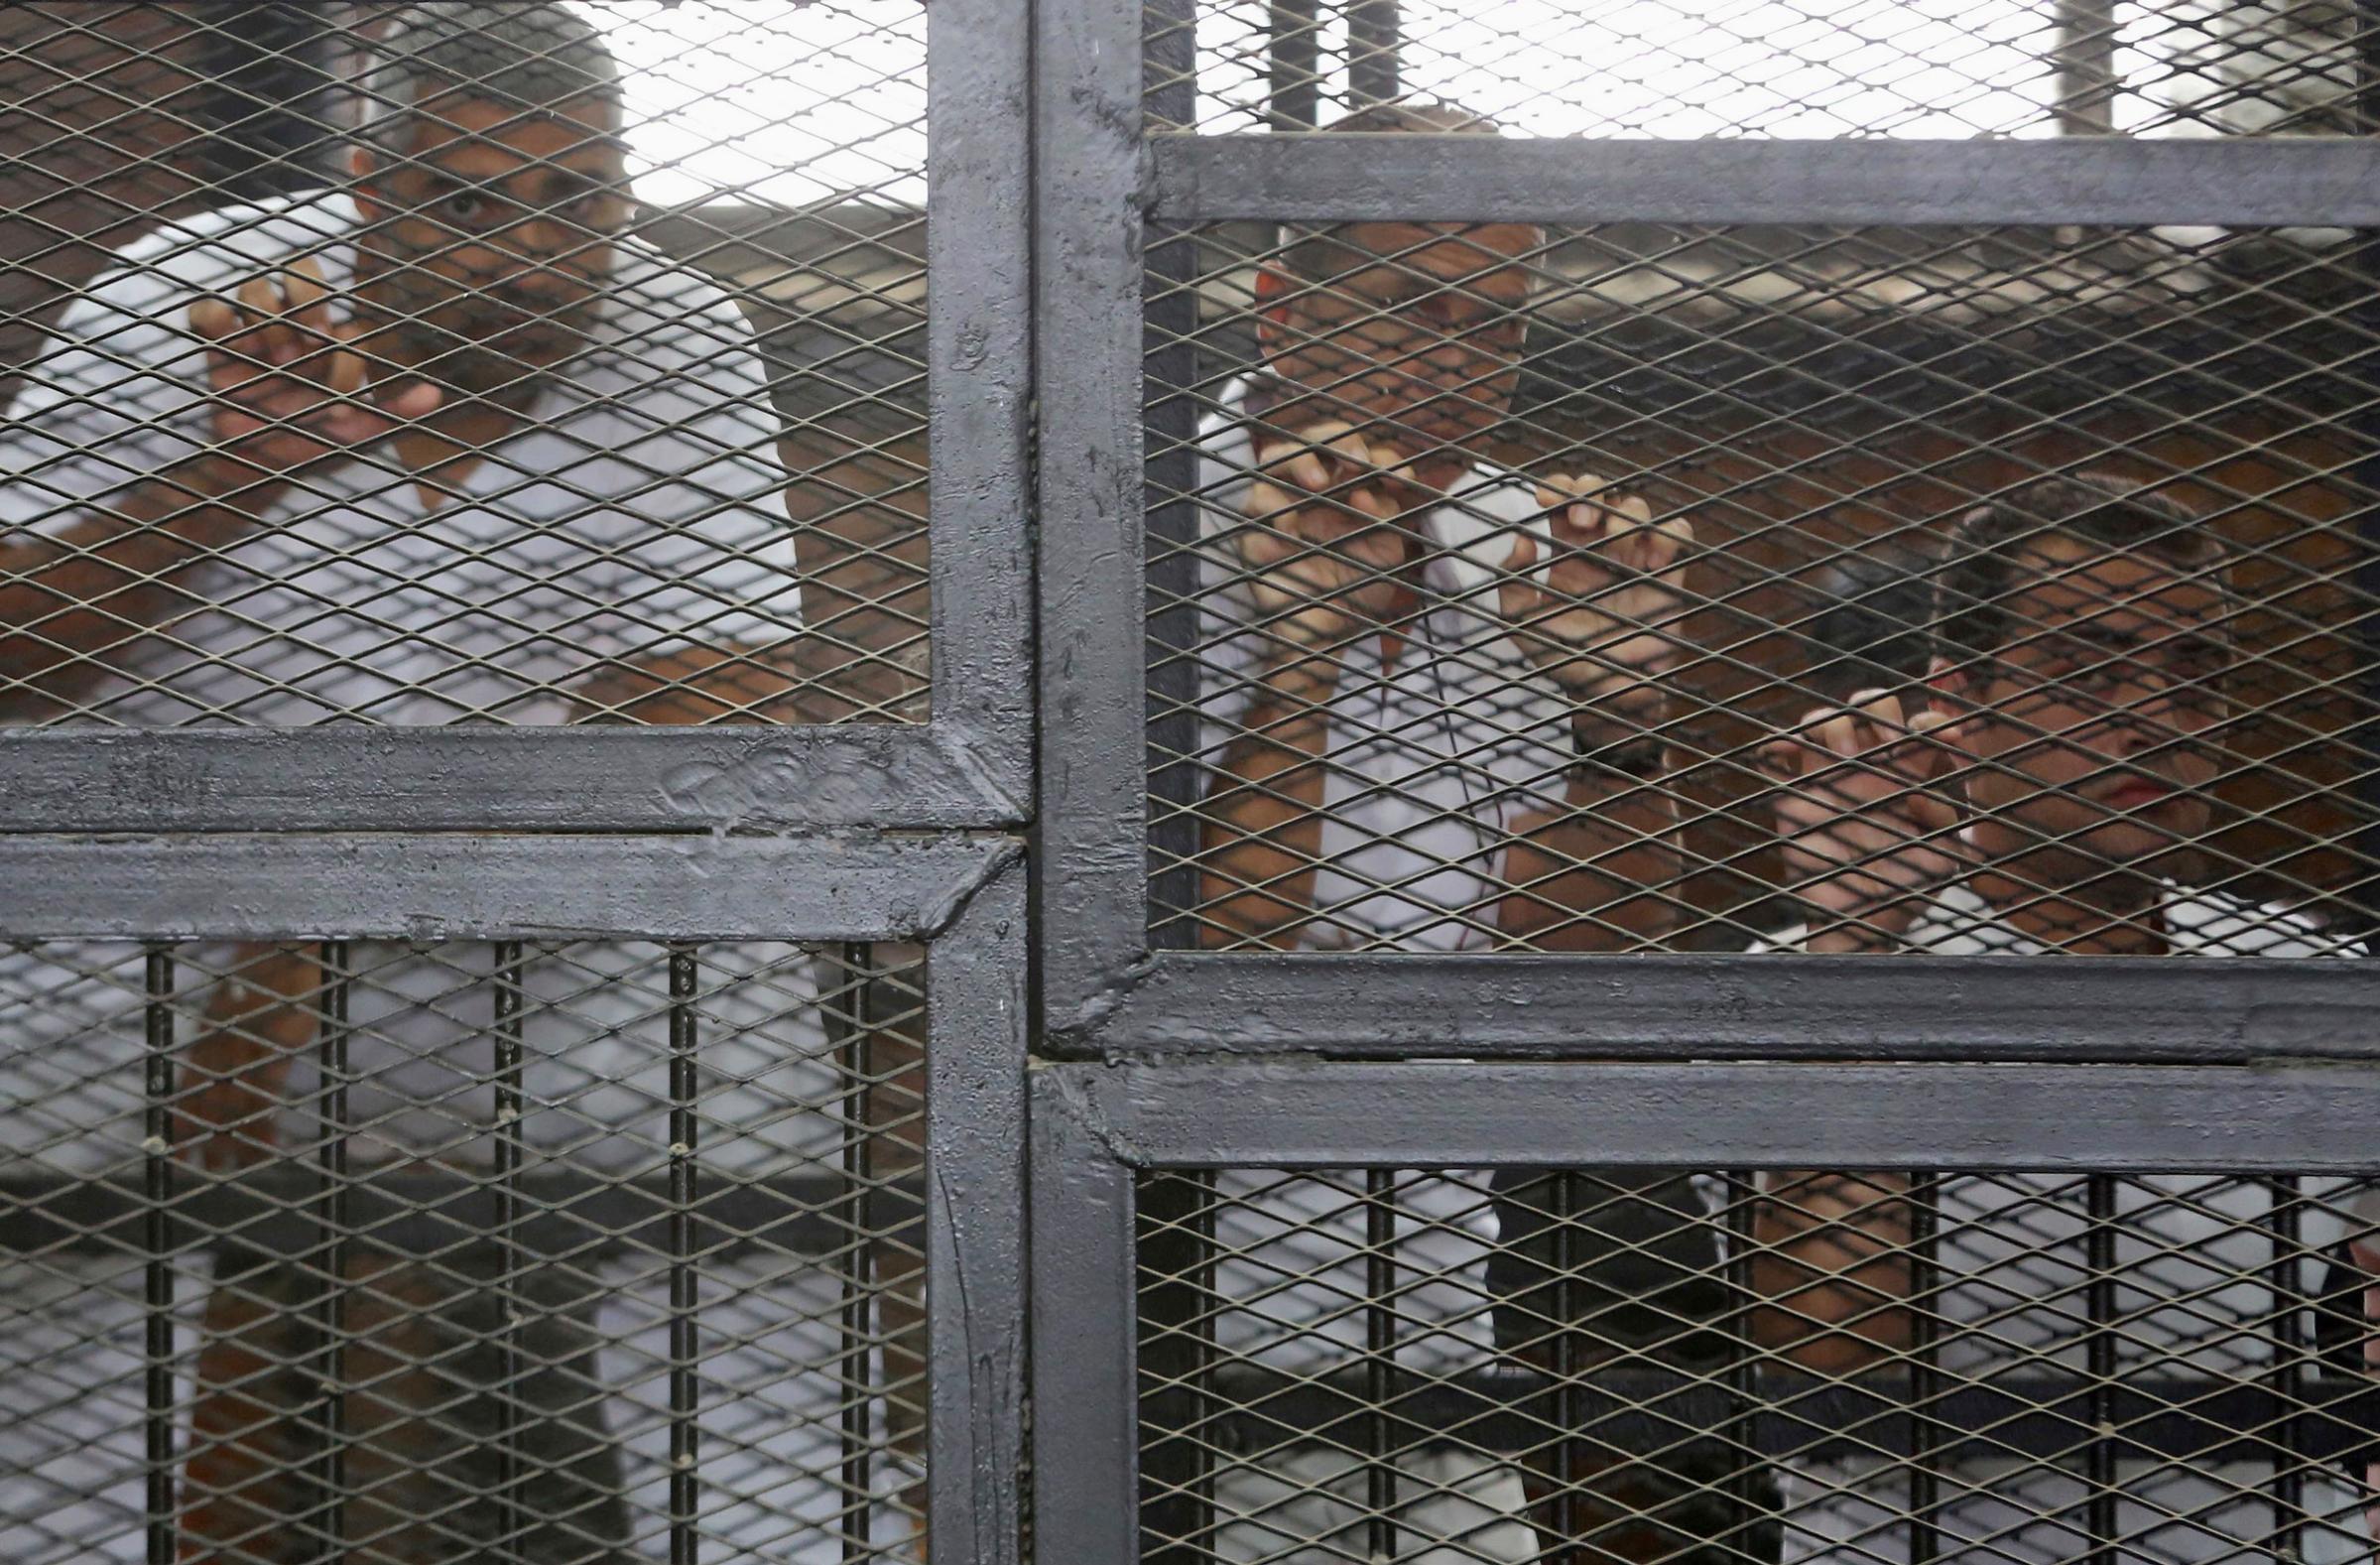 Al Jazeera journalists Mohammed Fahmy, Peter Greste and Baher Mohamed behind bars at a court in Cairo on May 15, 2014.